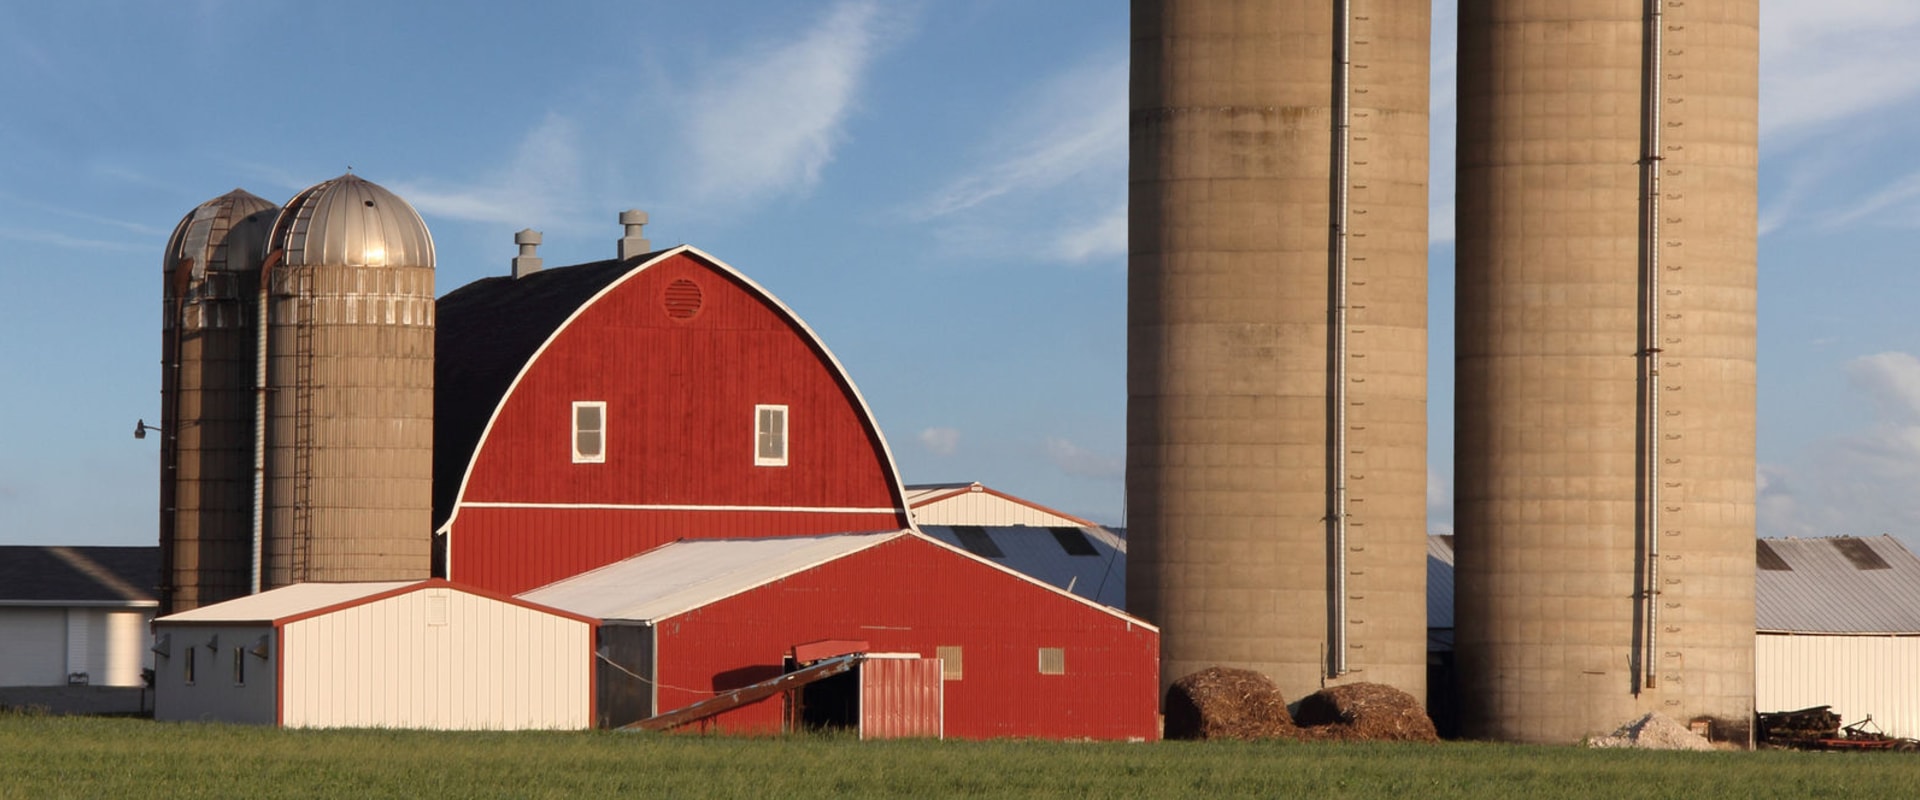 What is a silo picture?